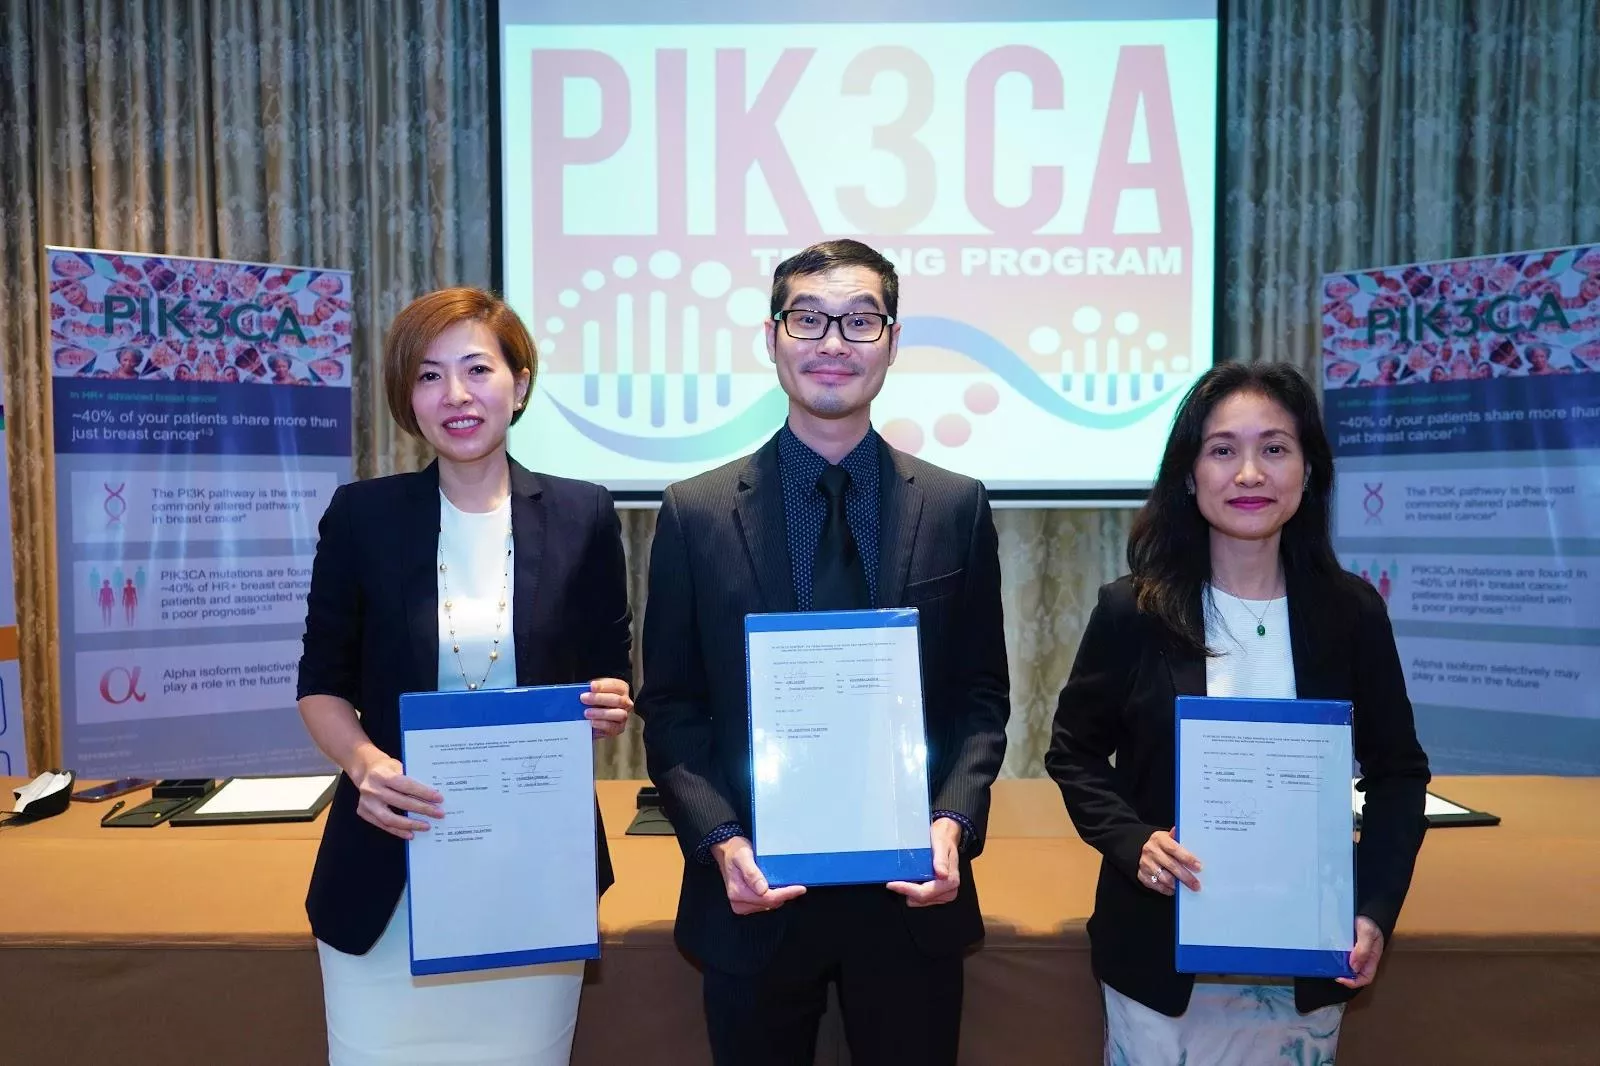 Stakeholder officials signed the formal agreement to implement the Novartis PIK3CA Testing Program for advanced  Breast Cancer patients. Photo shows 